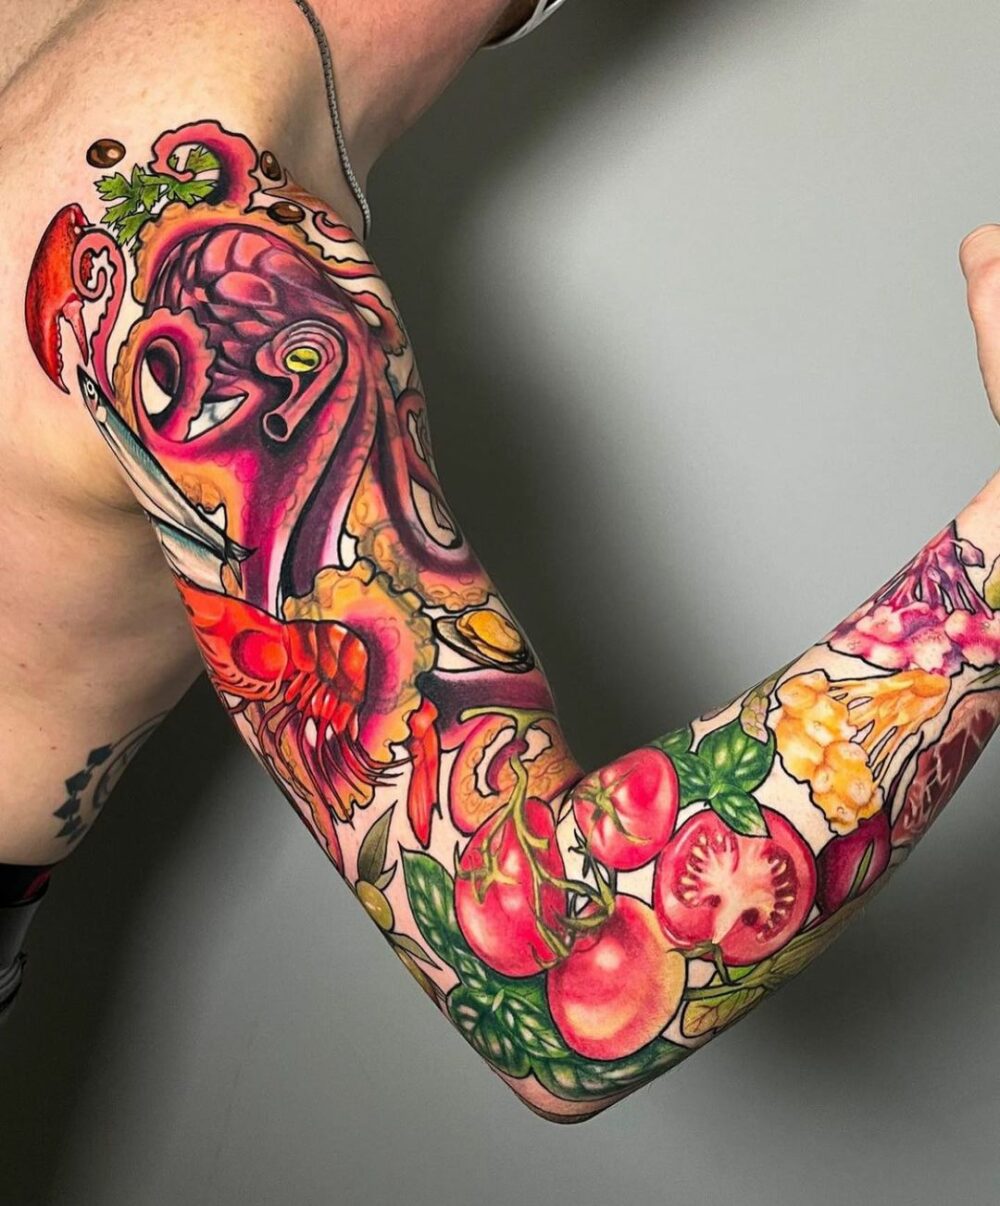 Common elements of food themed tattoos often include vegetables especially ones with vivid colors. Show your appreciation for the adaptability of vegetables by getting this edible tattoo